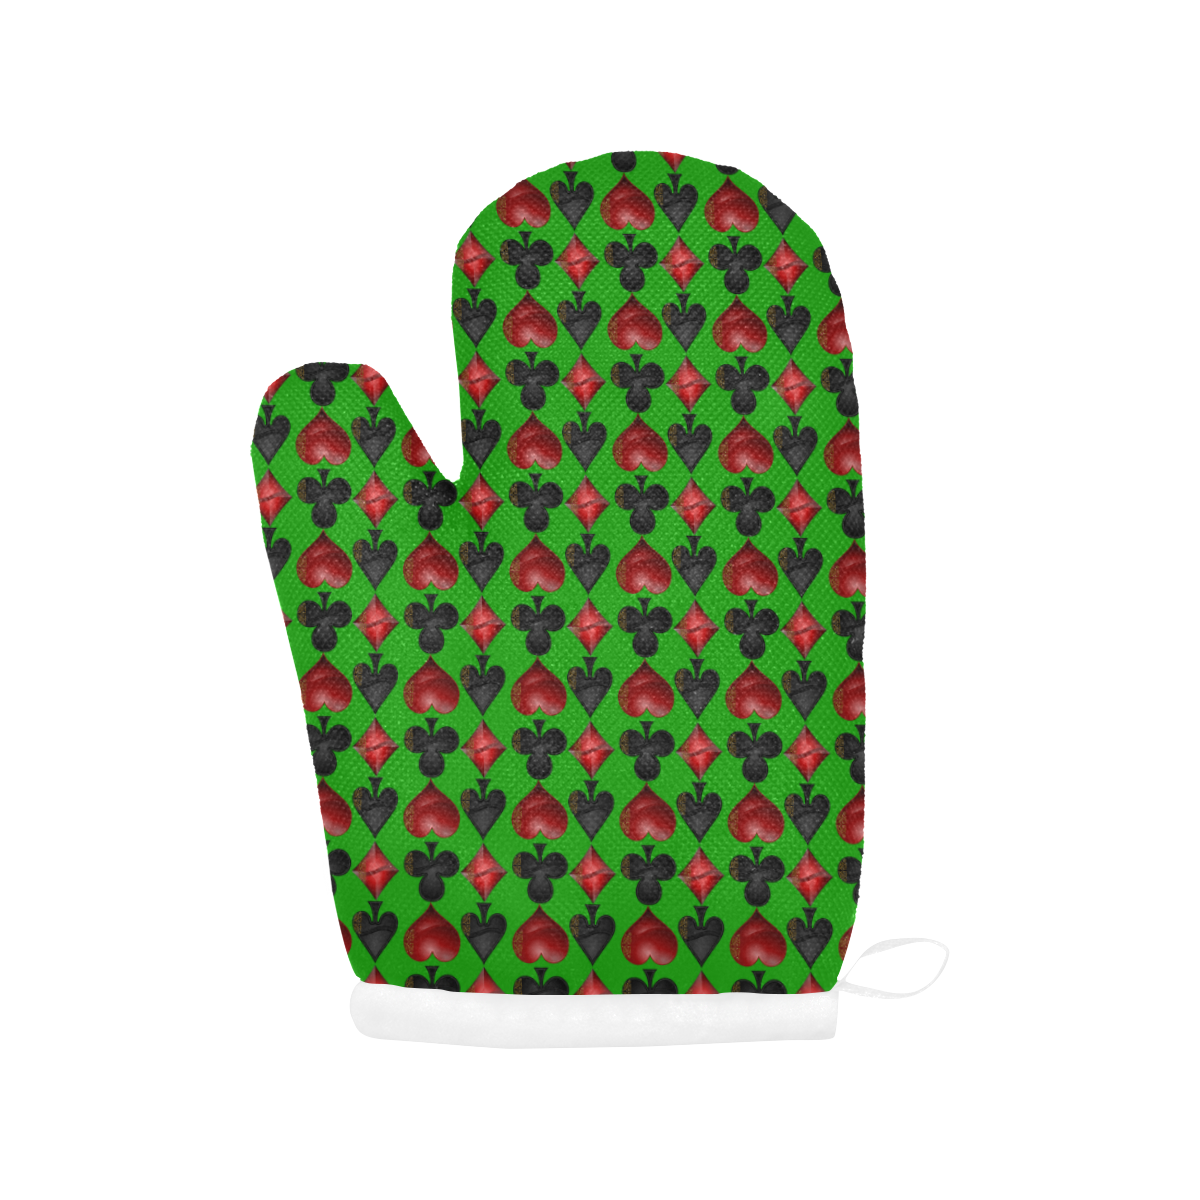 Las Vegas Black and Red Casino Poker Card Shapes on Green Oven Mitt (Two Pieces)